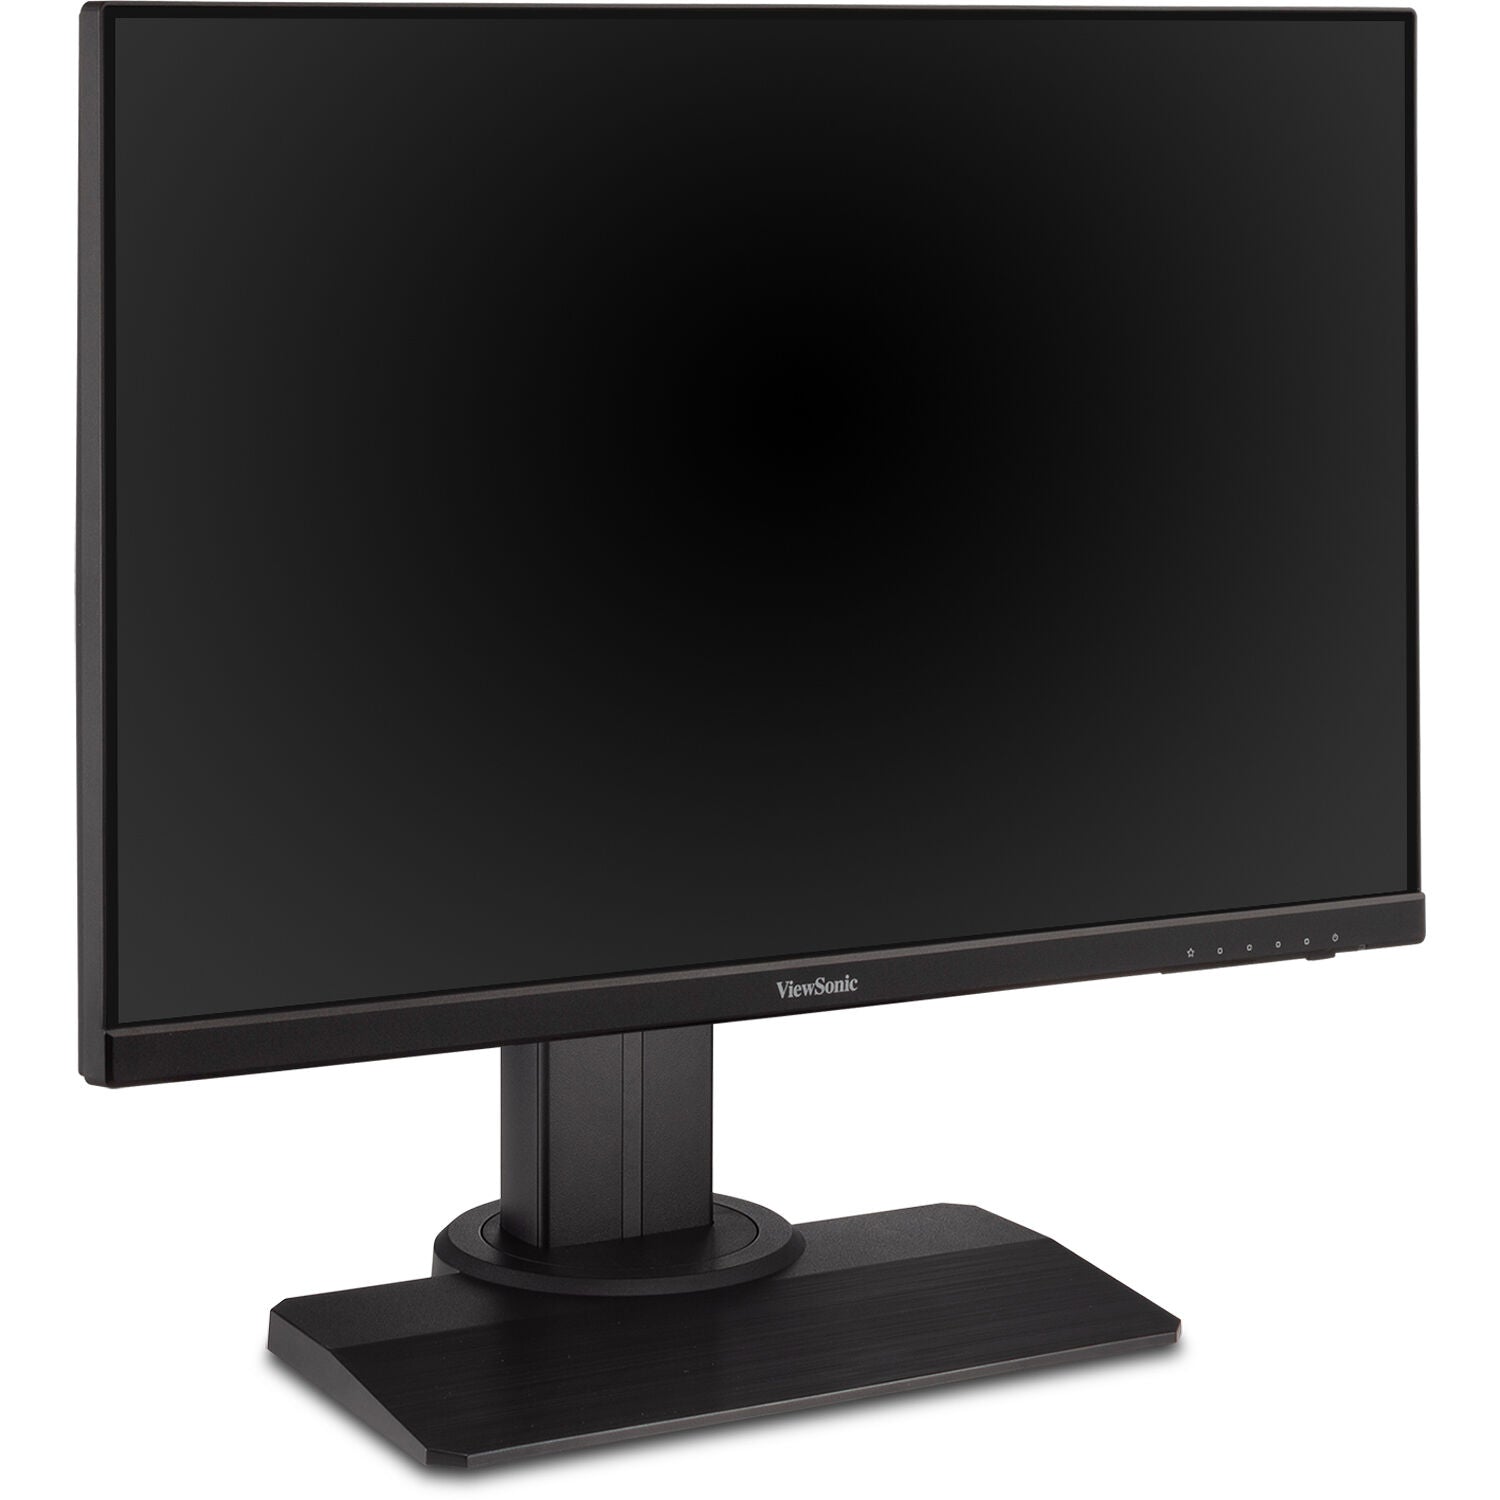 ViewSonic XG2705-2K-R 1440p 1ms 144Hz Free Sync, HDMI and DP for Esports IPS Gaming Monitor - Certified Refurbished